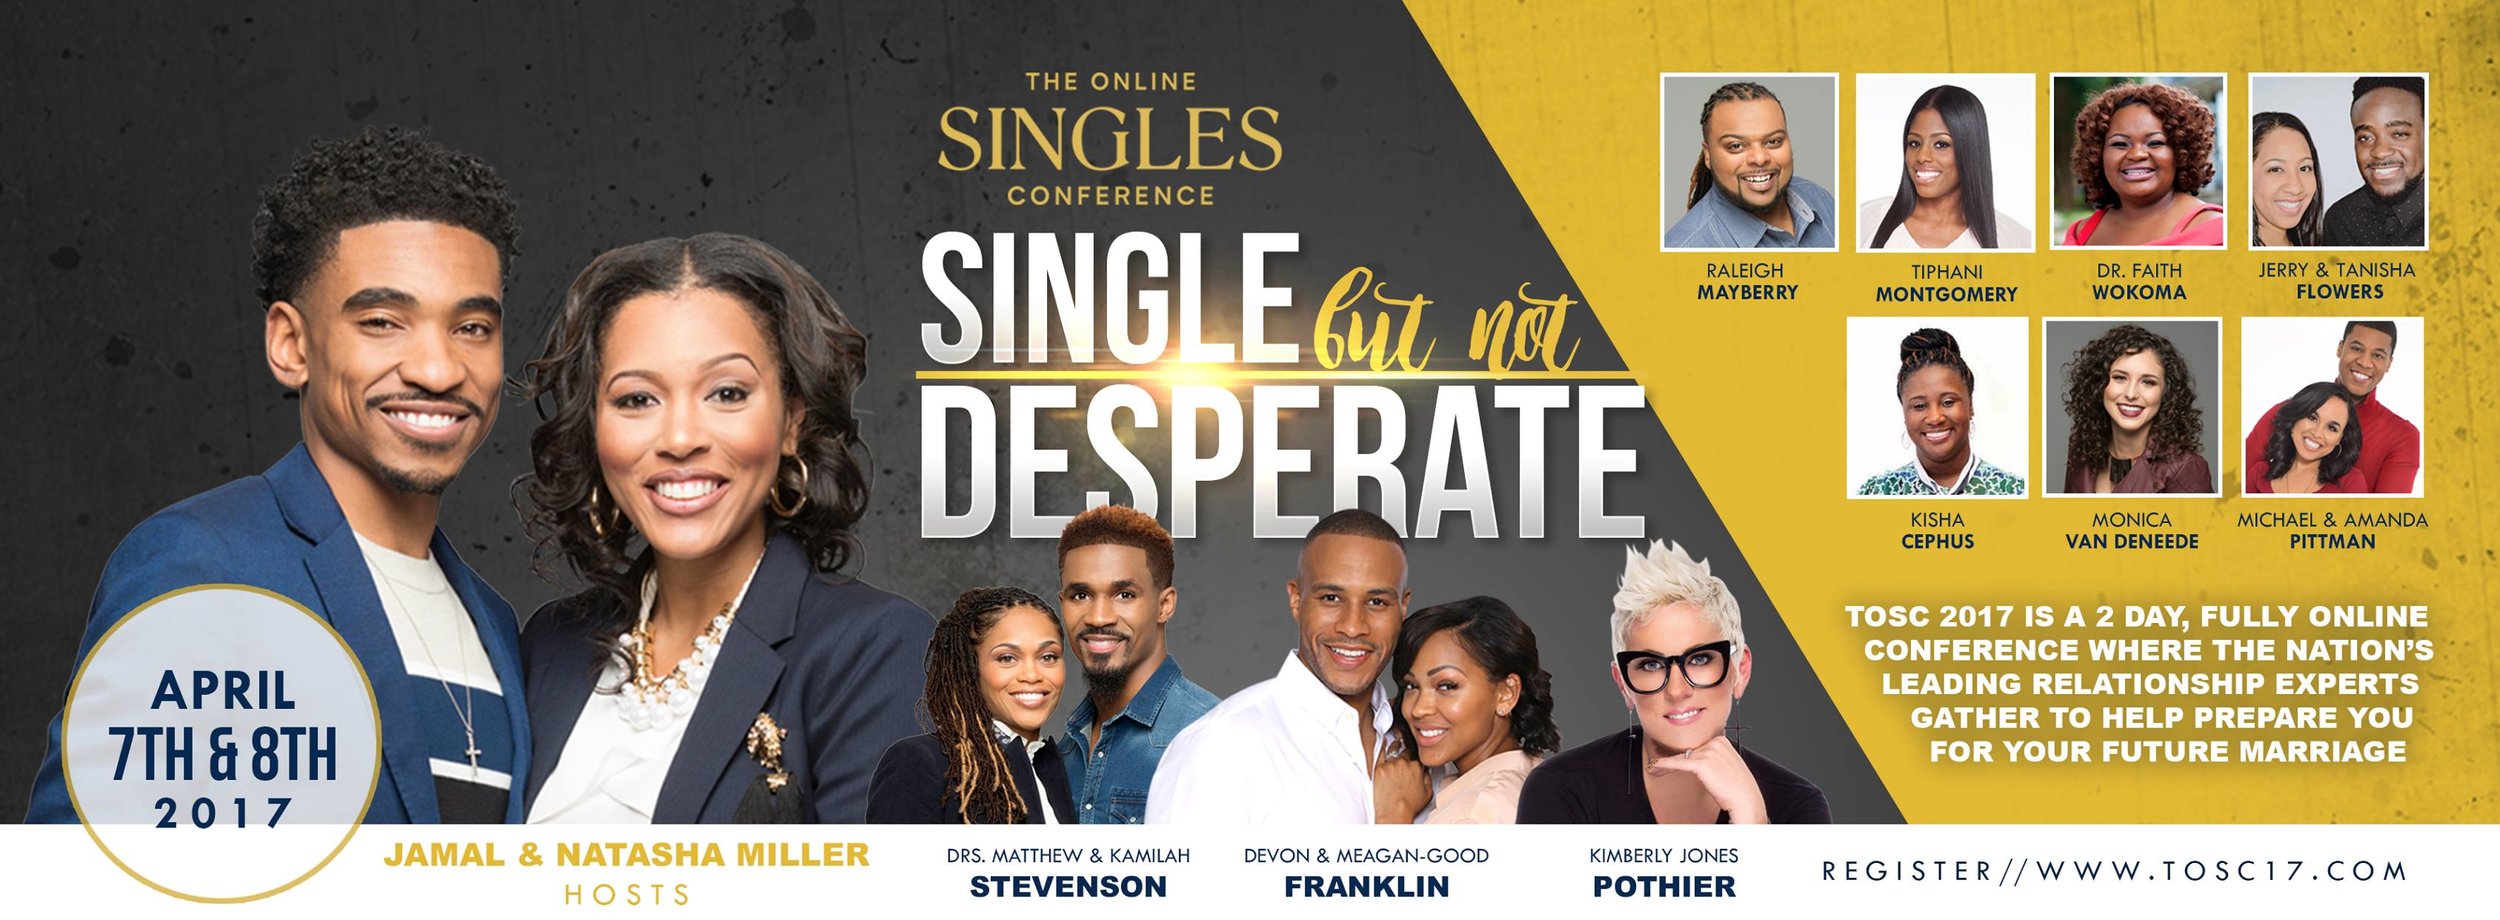 ...matthew stevenson iii. the online singles conference 2017. the online si...